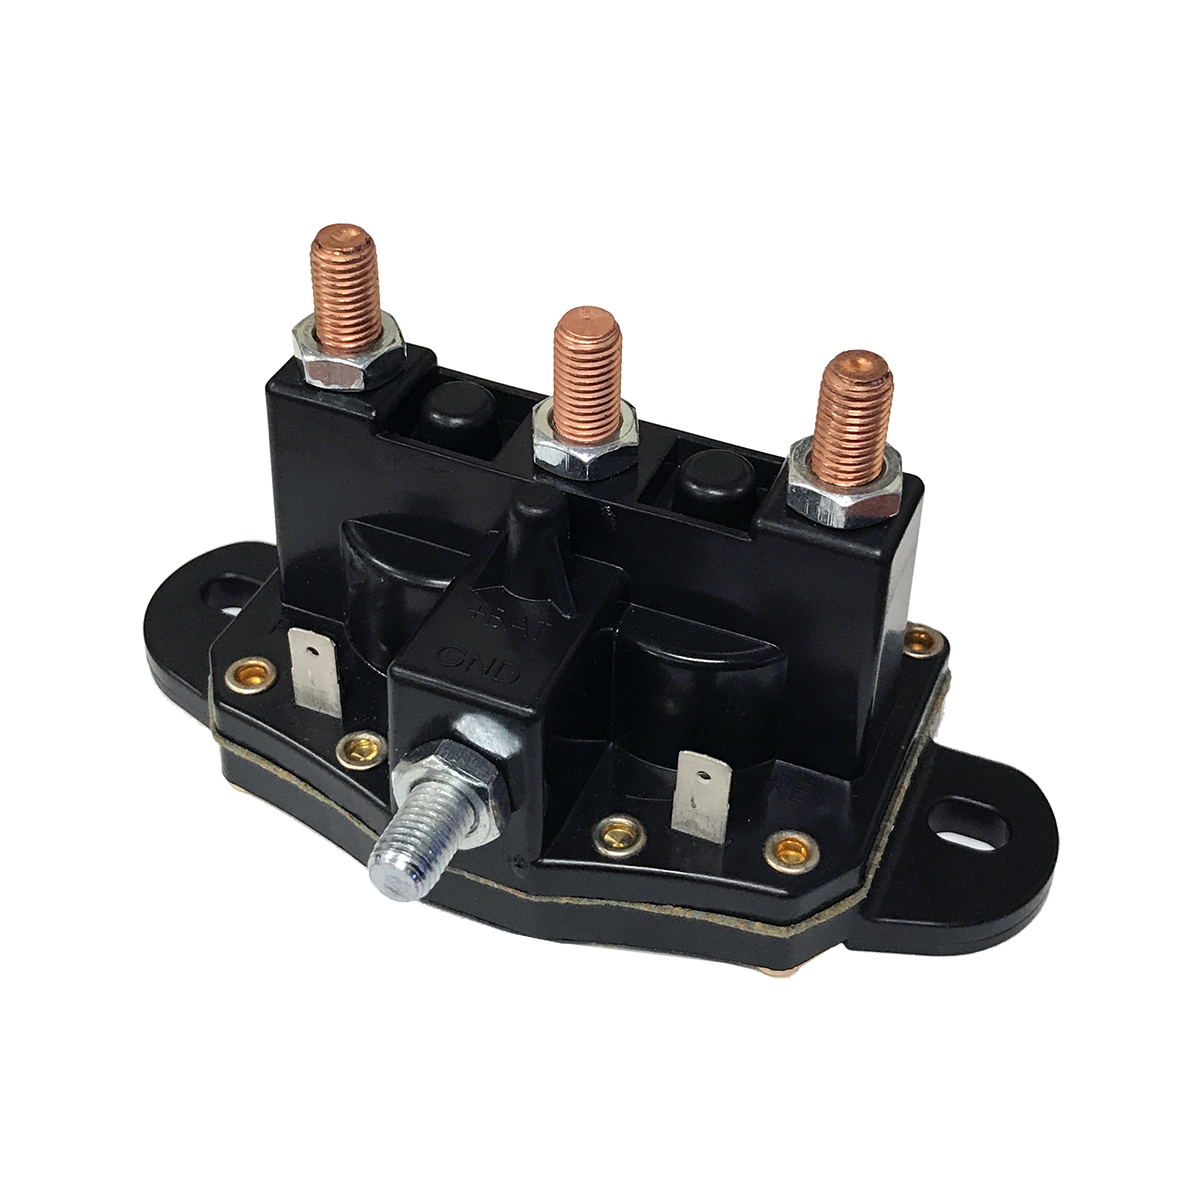 Lippert Components 136046 Dual Polarity Solenoid Copper Posts with Mounting Strap 